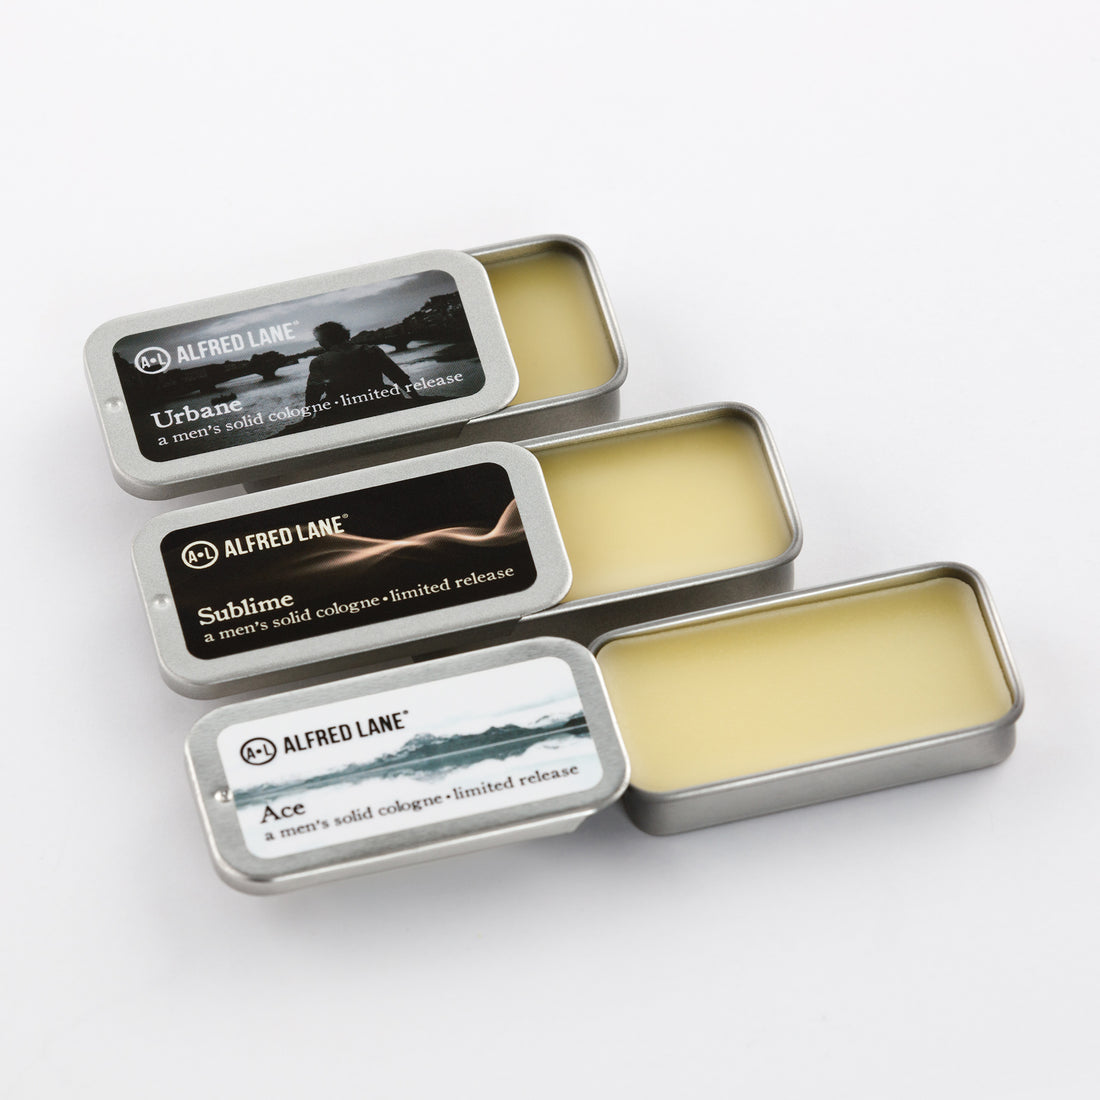 Alfred Lane Solid Cologne Limited Release Collection